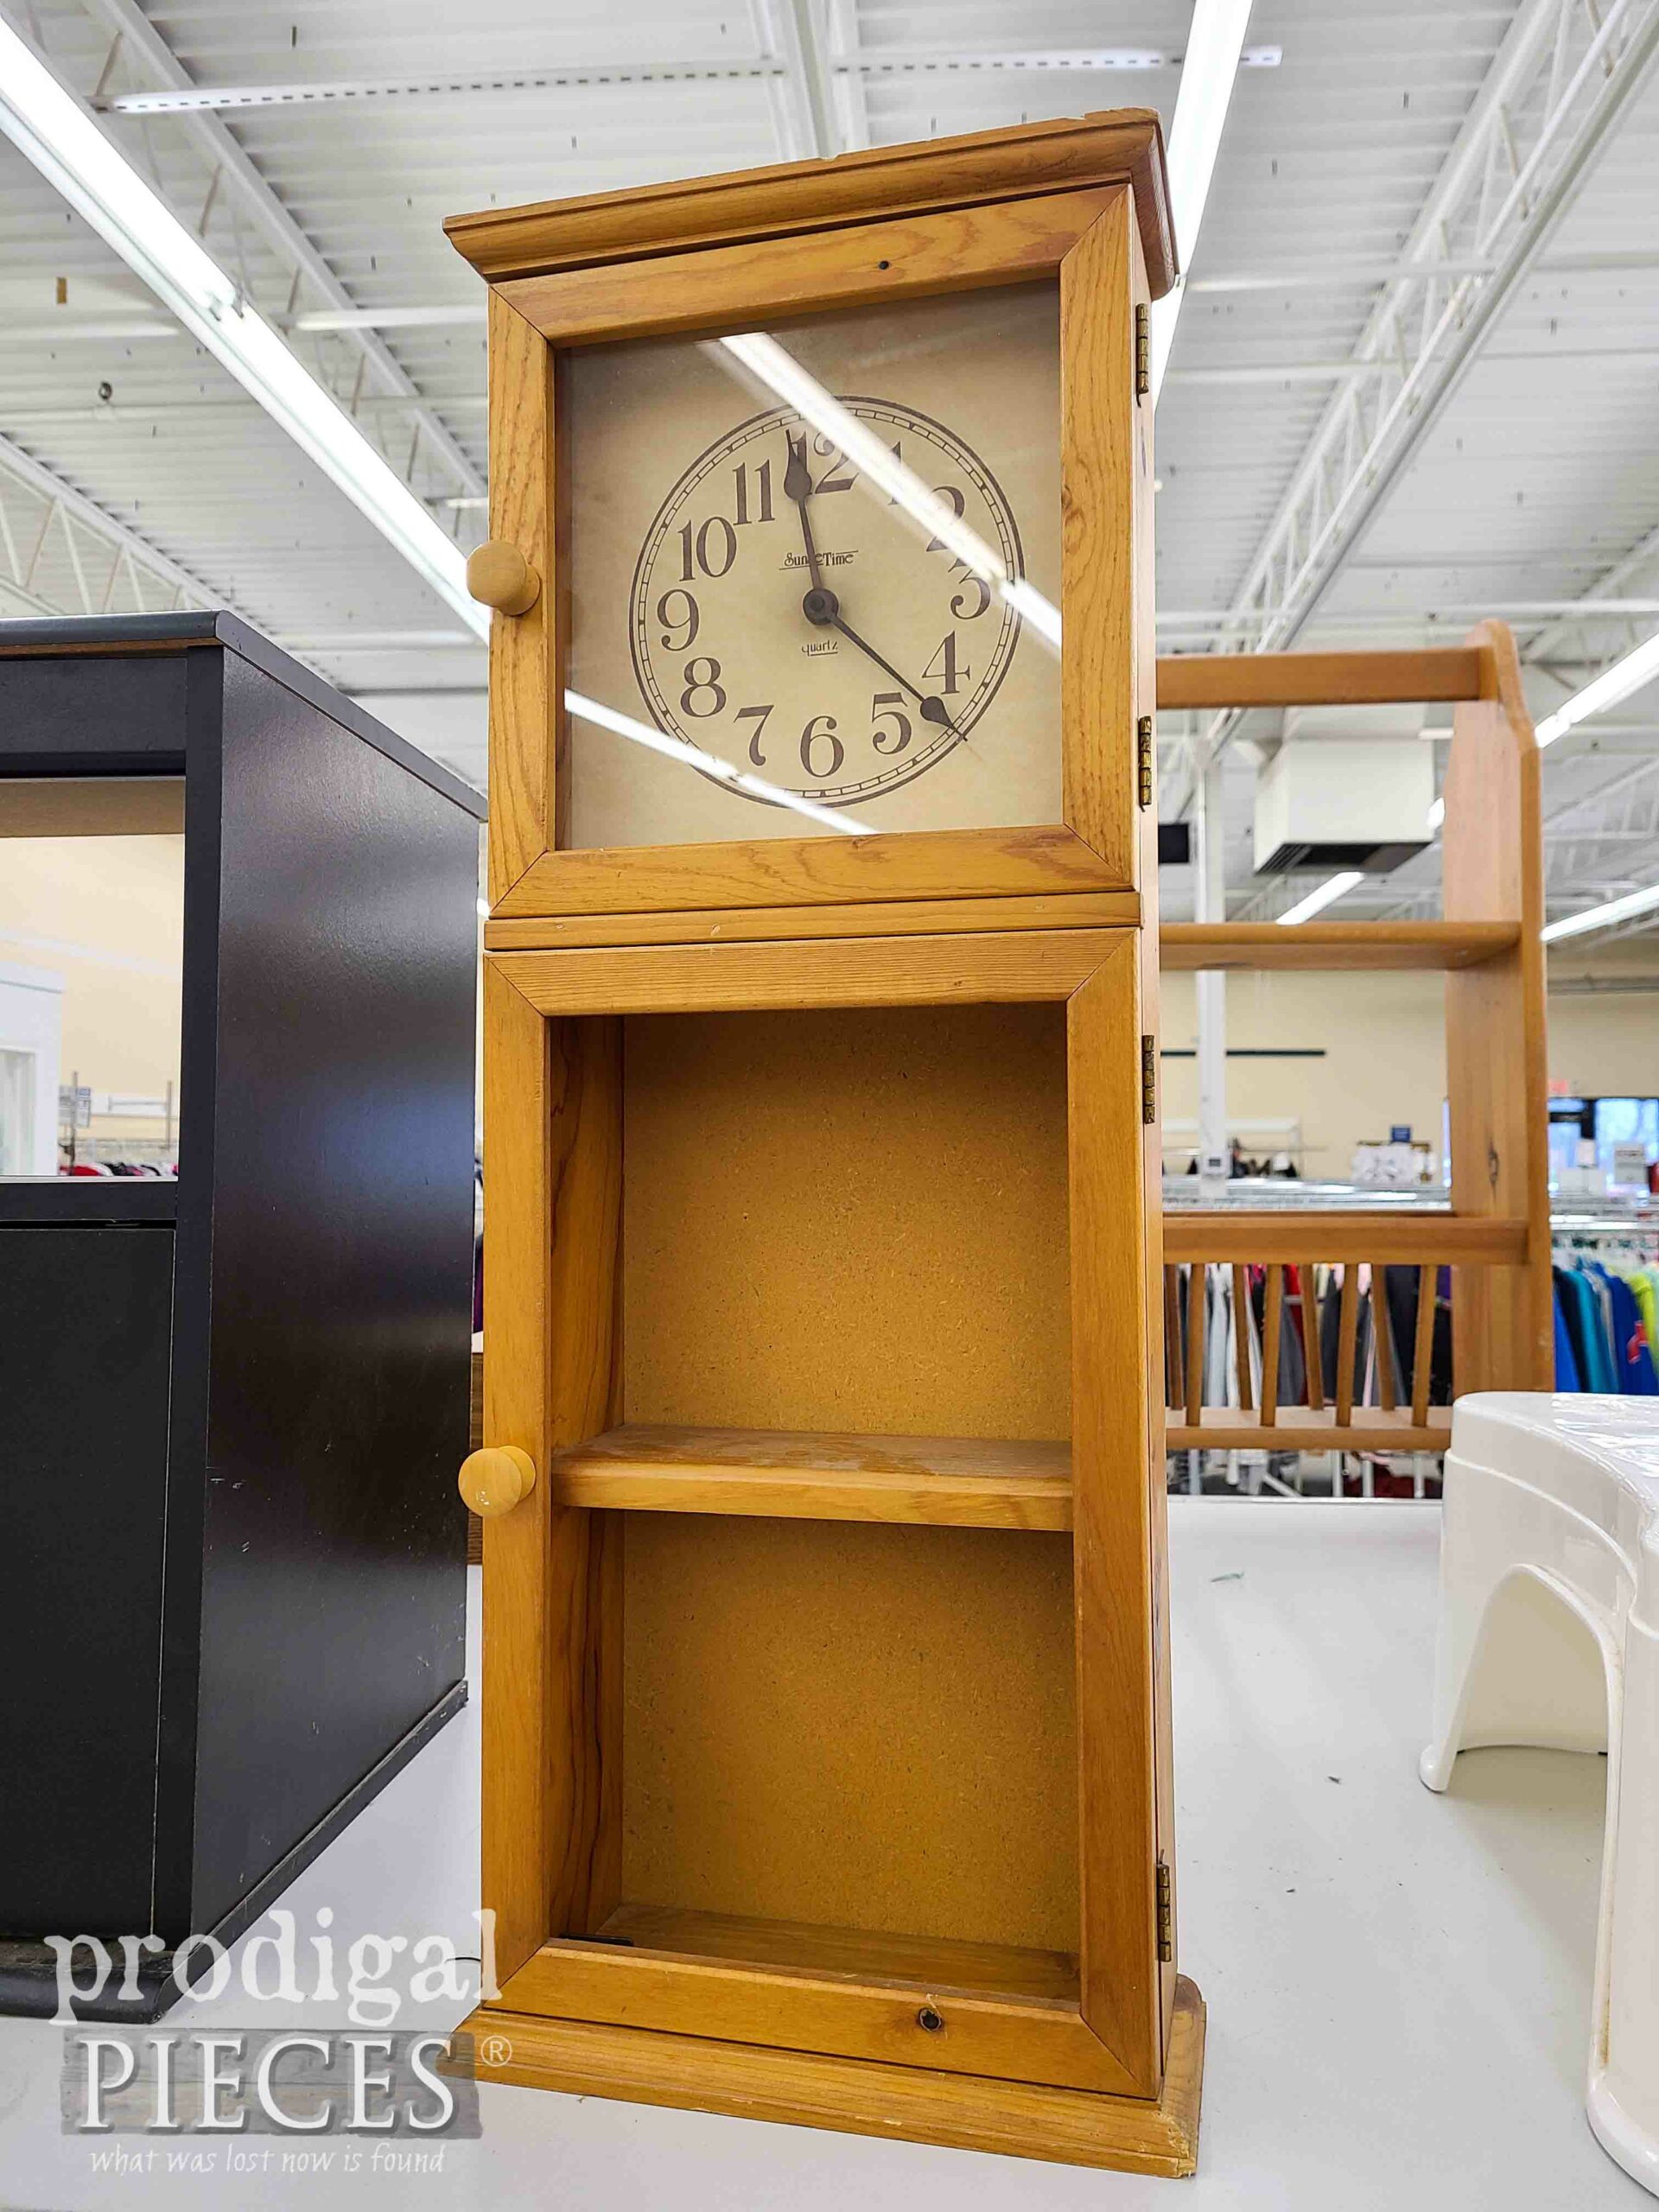 Thrifted Clock Before Repurposed Project | prodigalpieces.com #prodigalpieces